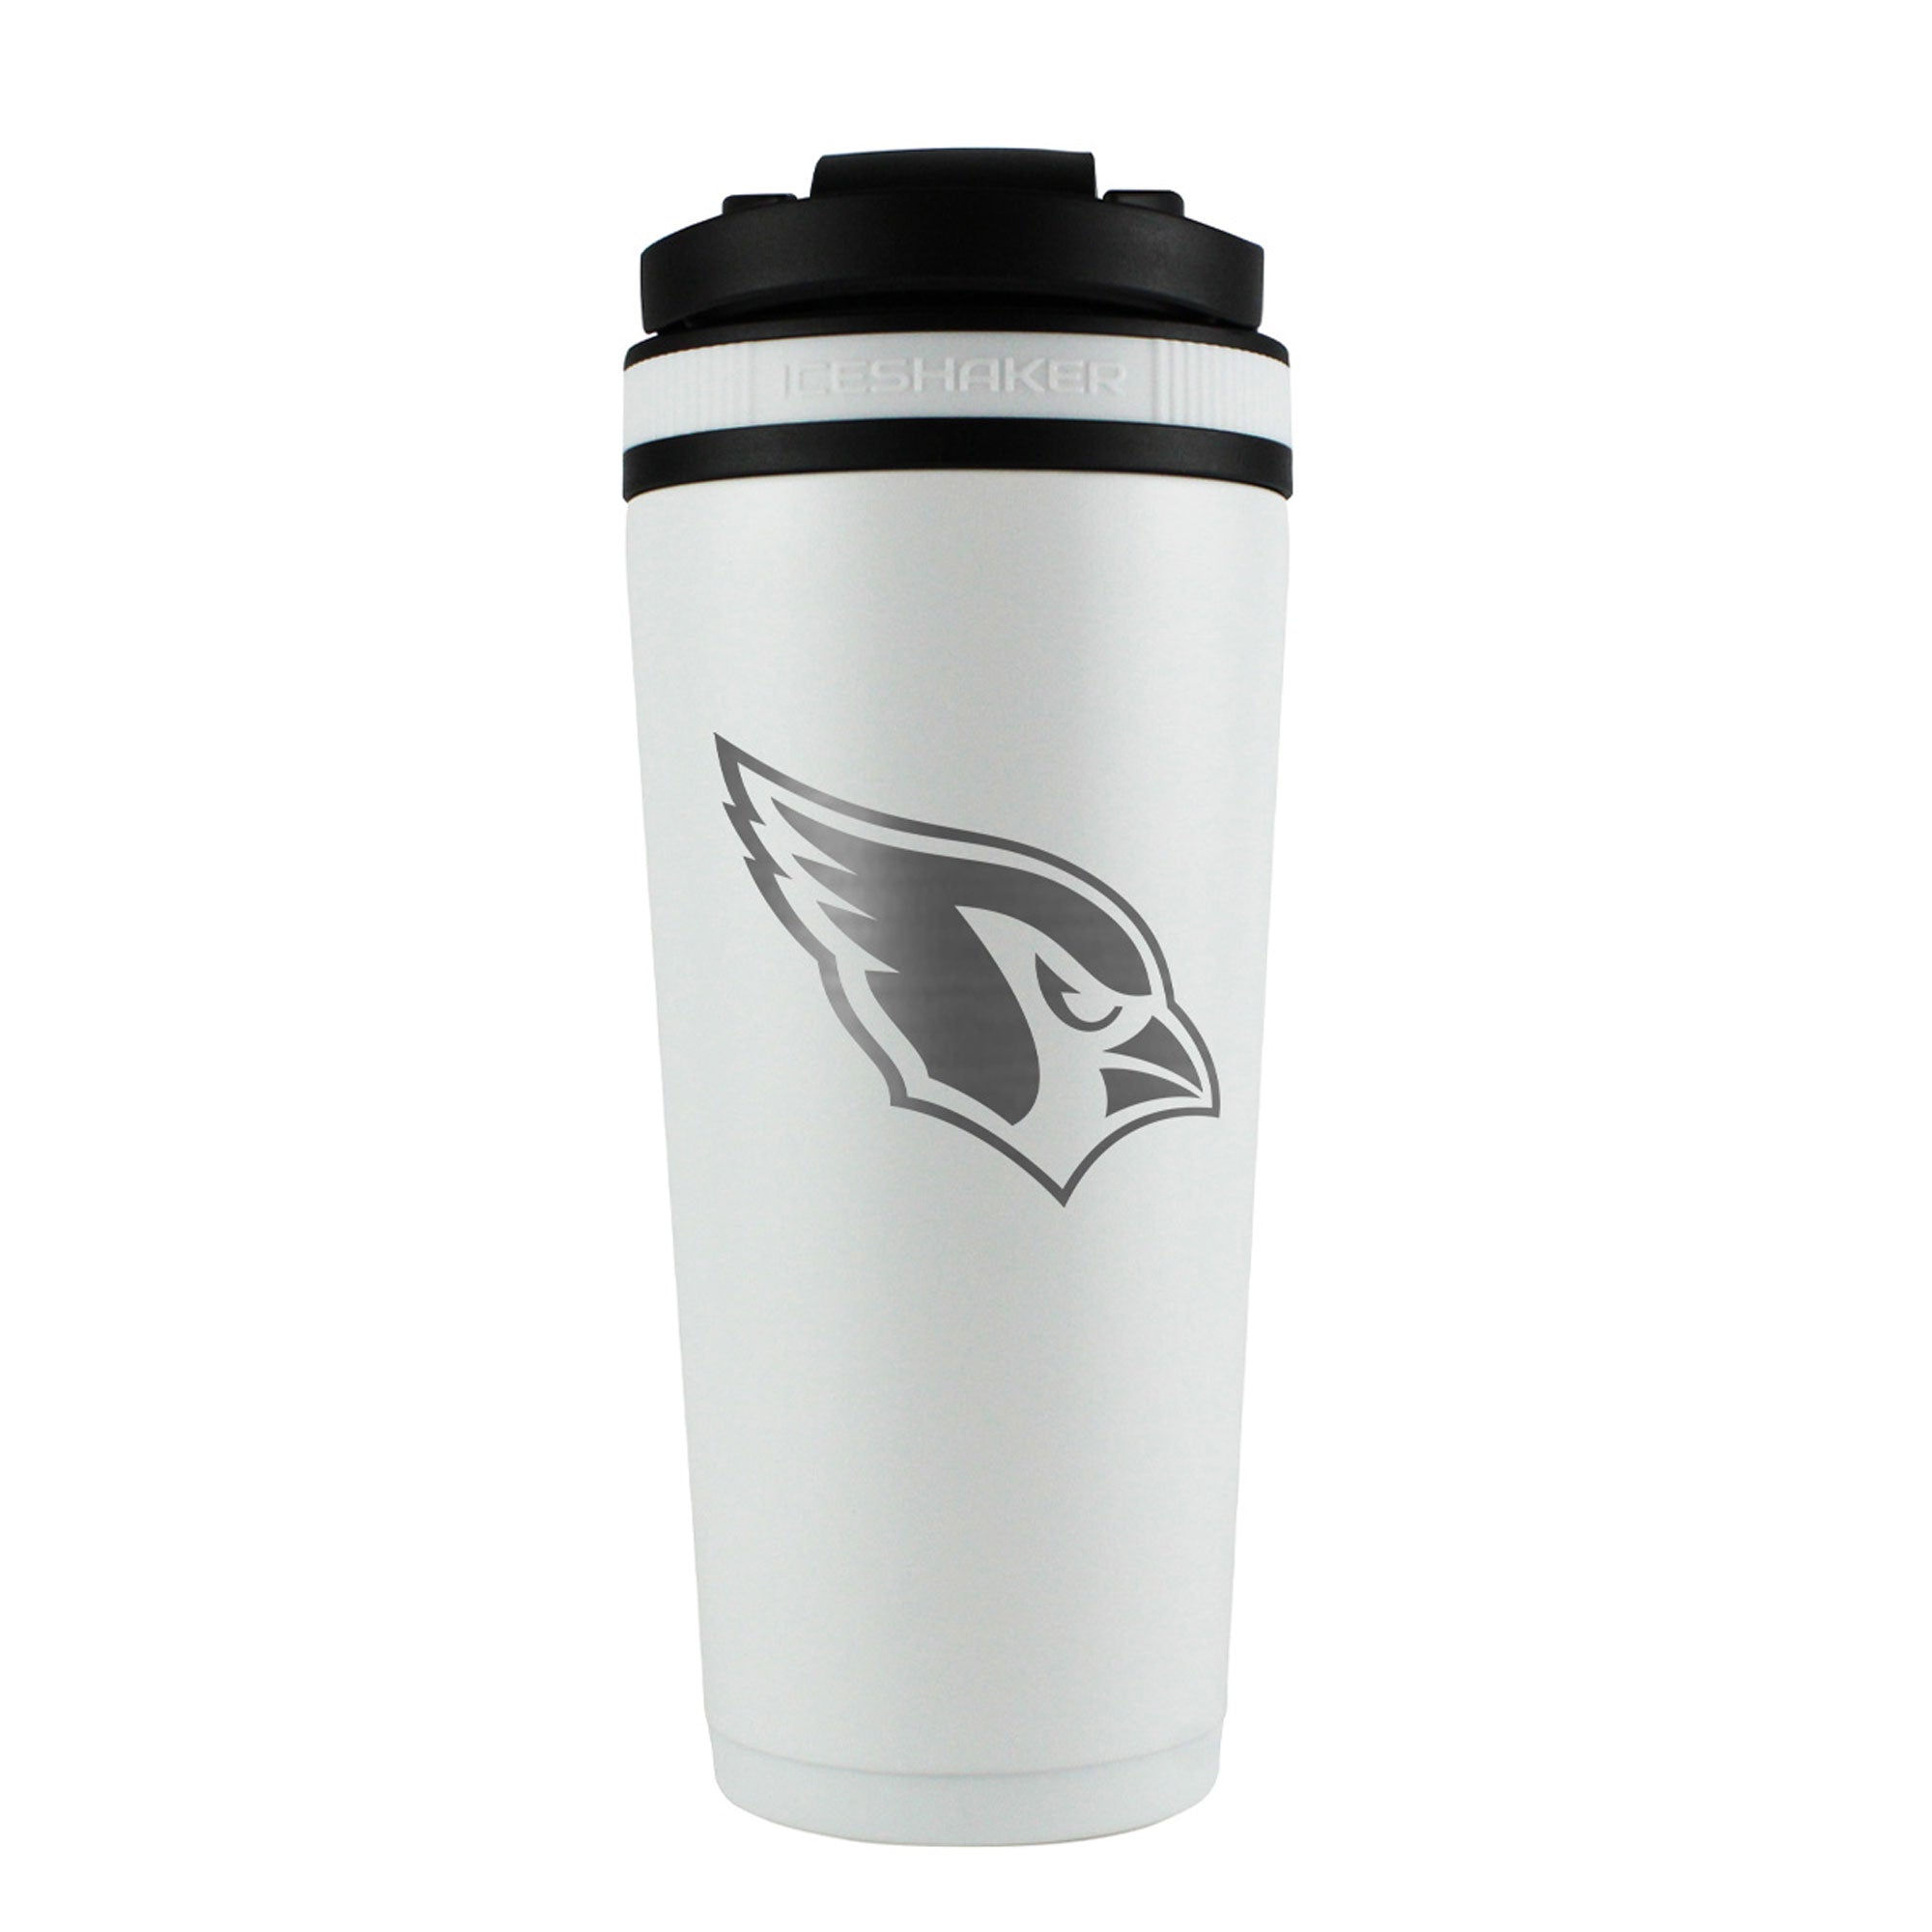 Officially Licensed Arizona Cardinals 26oz Ice Shaker